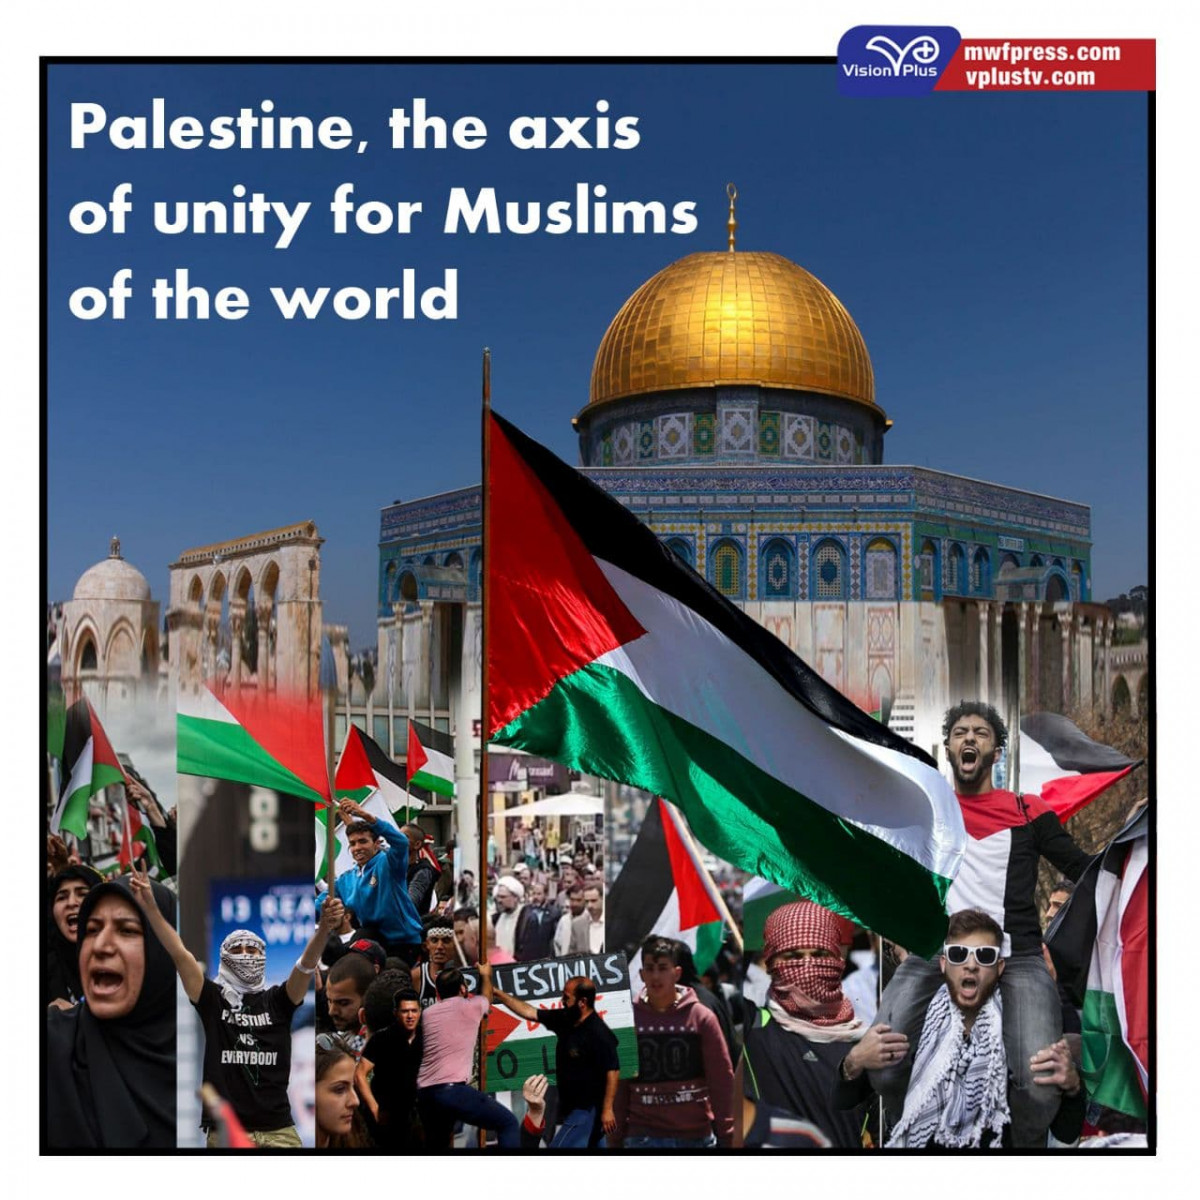 Palestine, the axis of unity for Muslims of the world